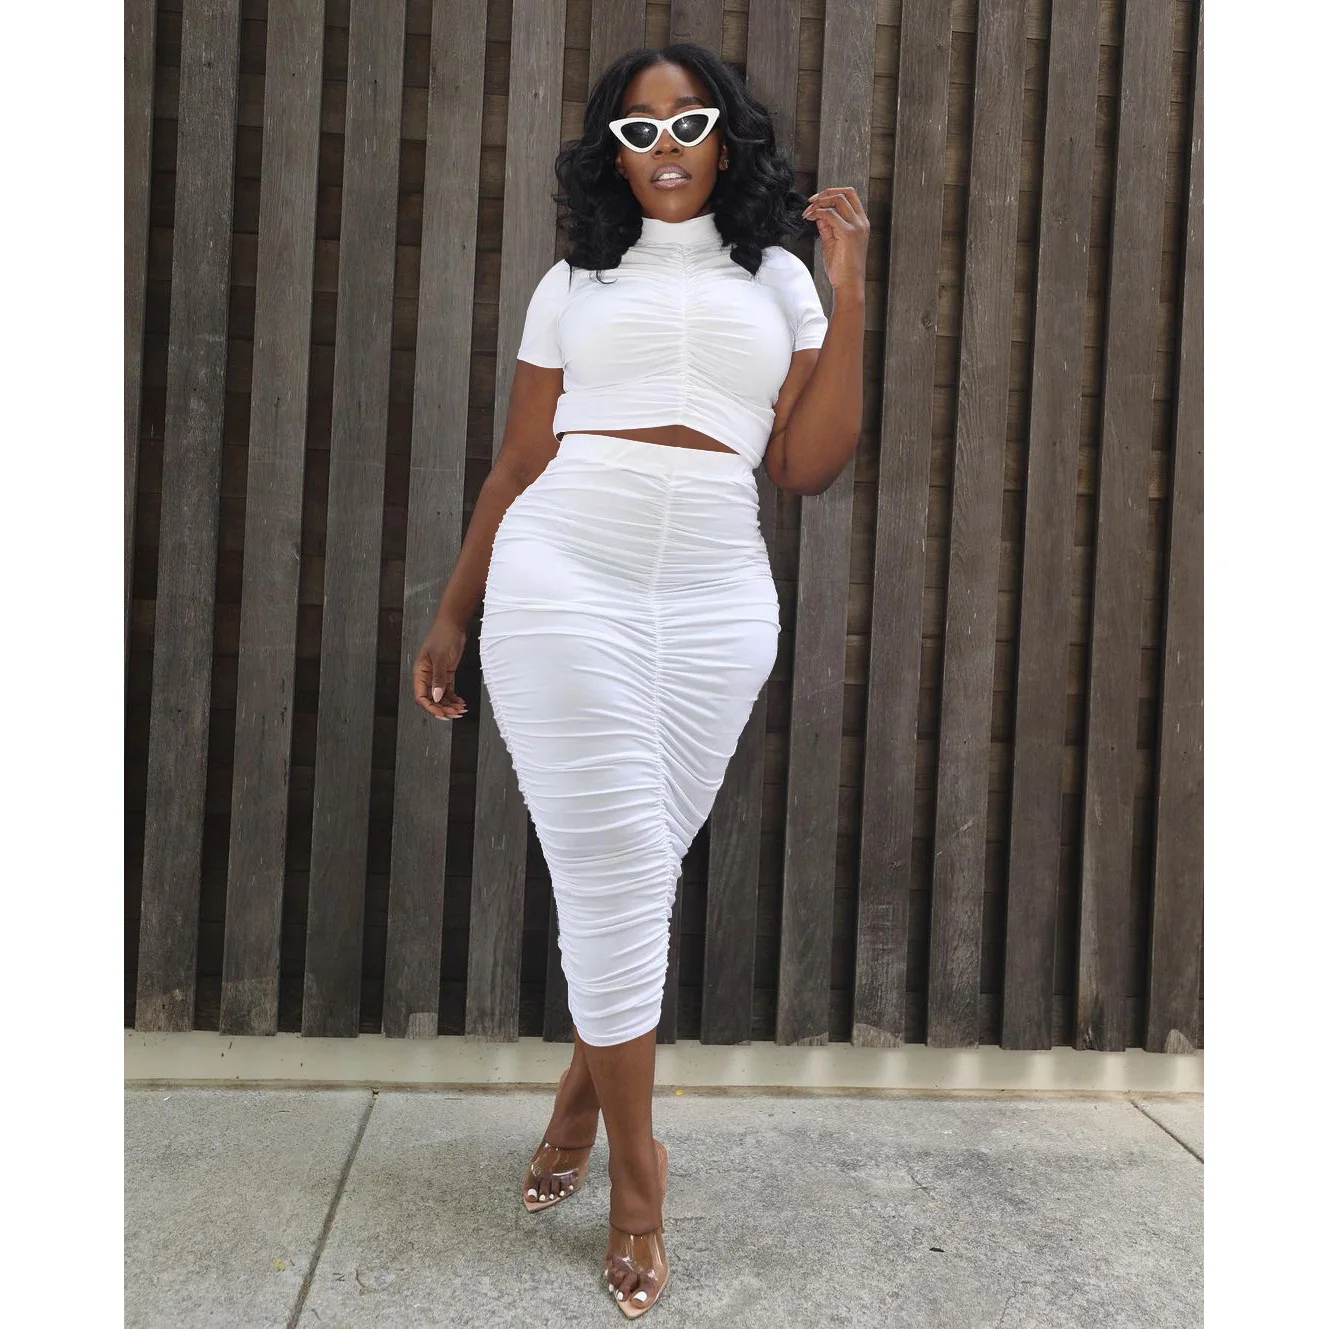 

Solid Color Ruched 2 Two Piece Set Dress Woman Short Sleeve Turtleneck Crop Top And Draped Bodycon Maxi Skirt Summer Outfits